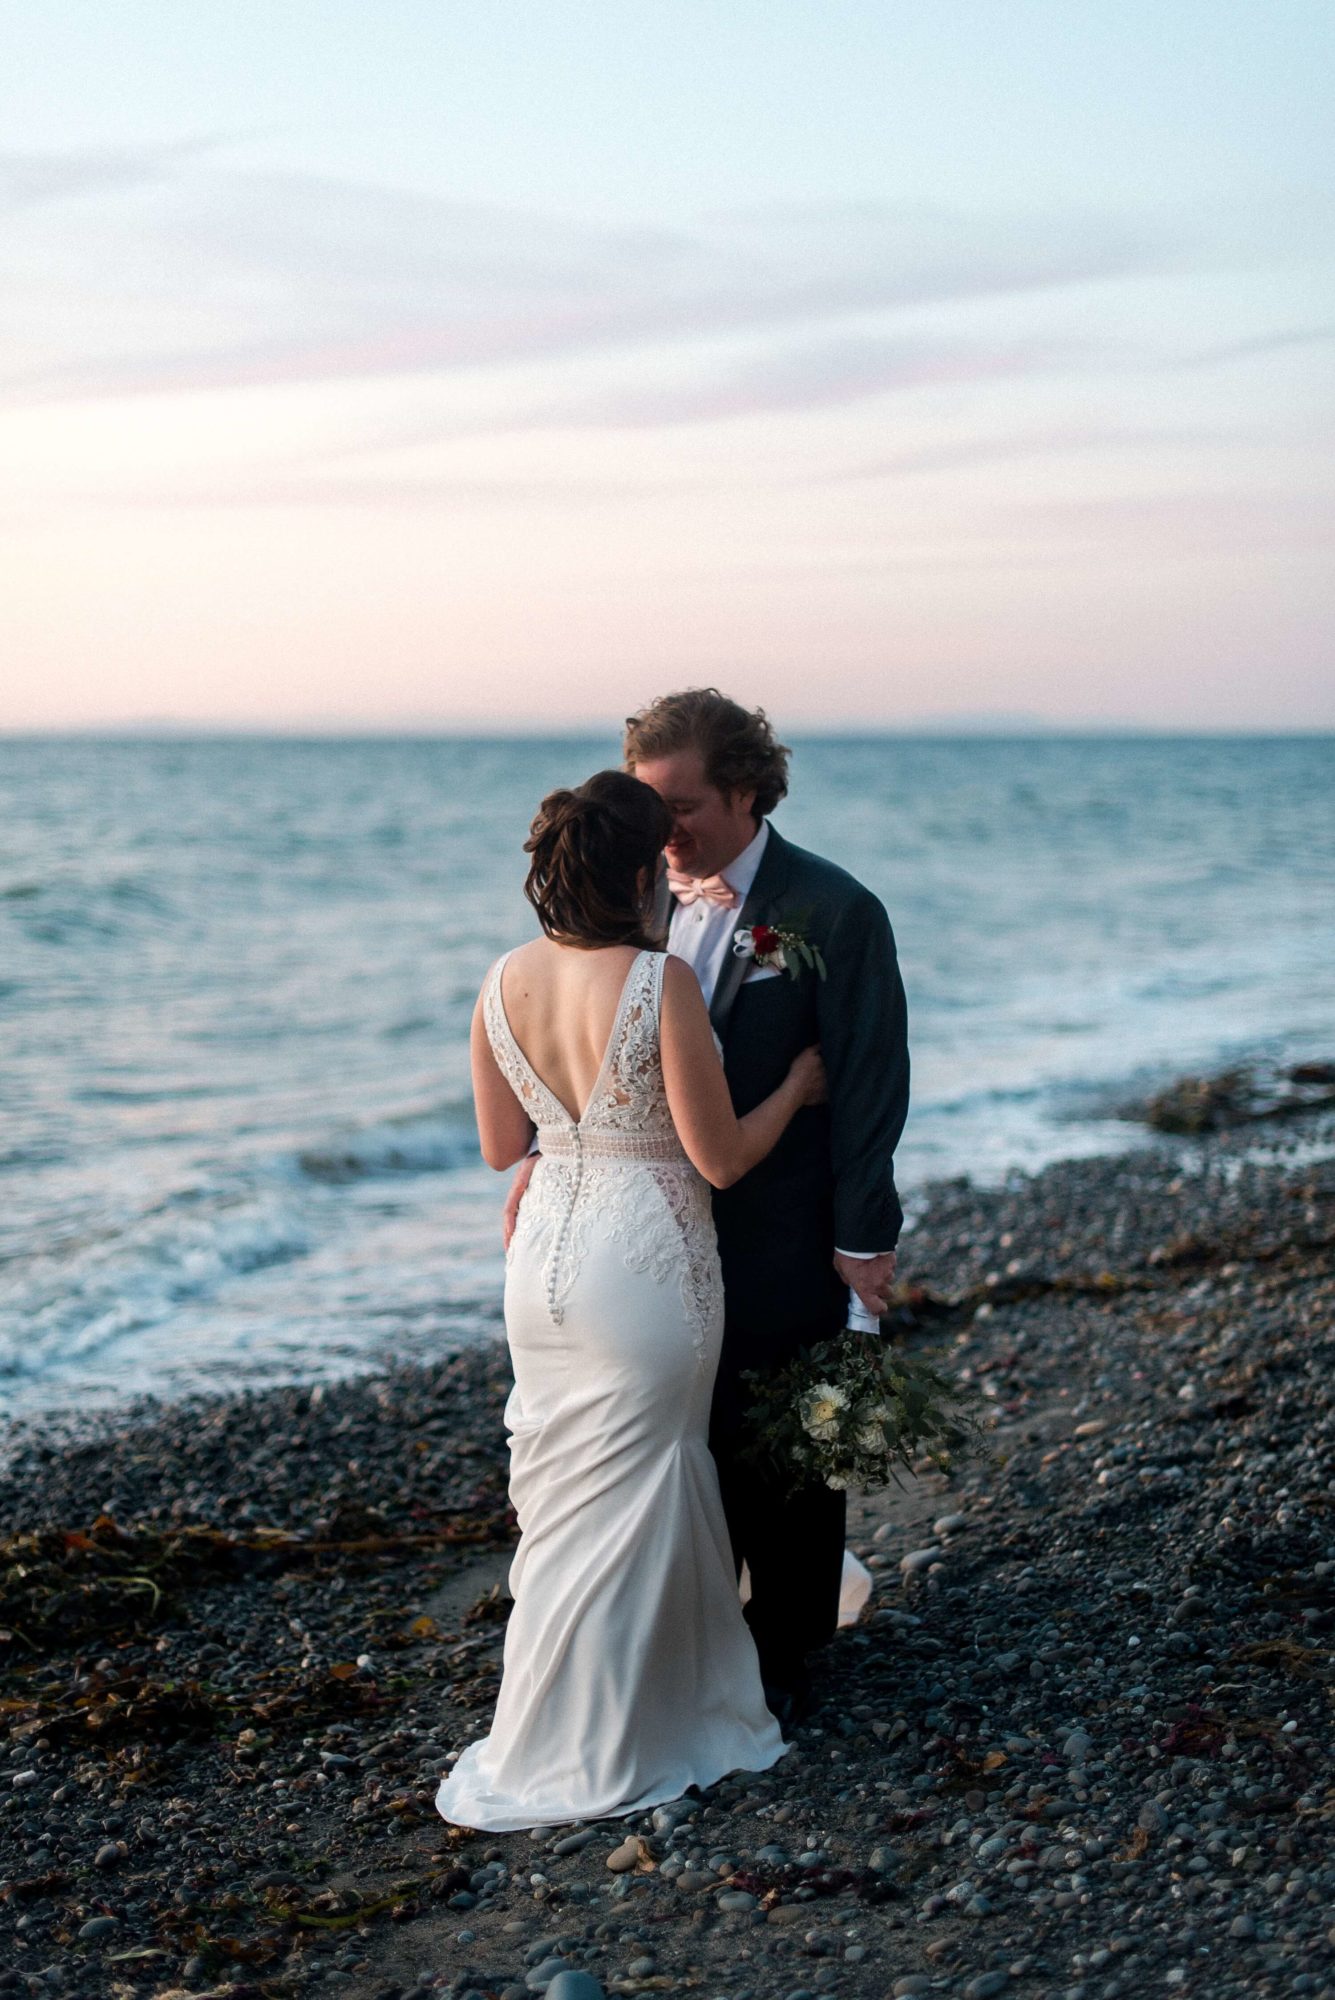 Bride and groom on the beach at sunset in Port Townsend